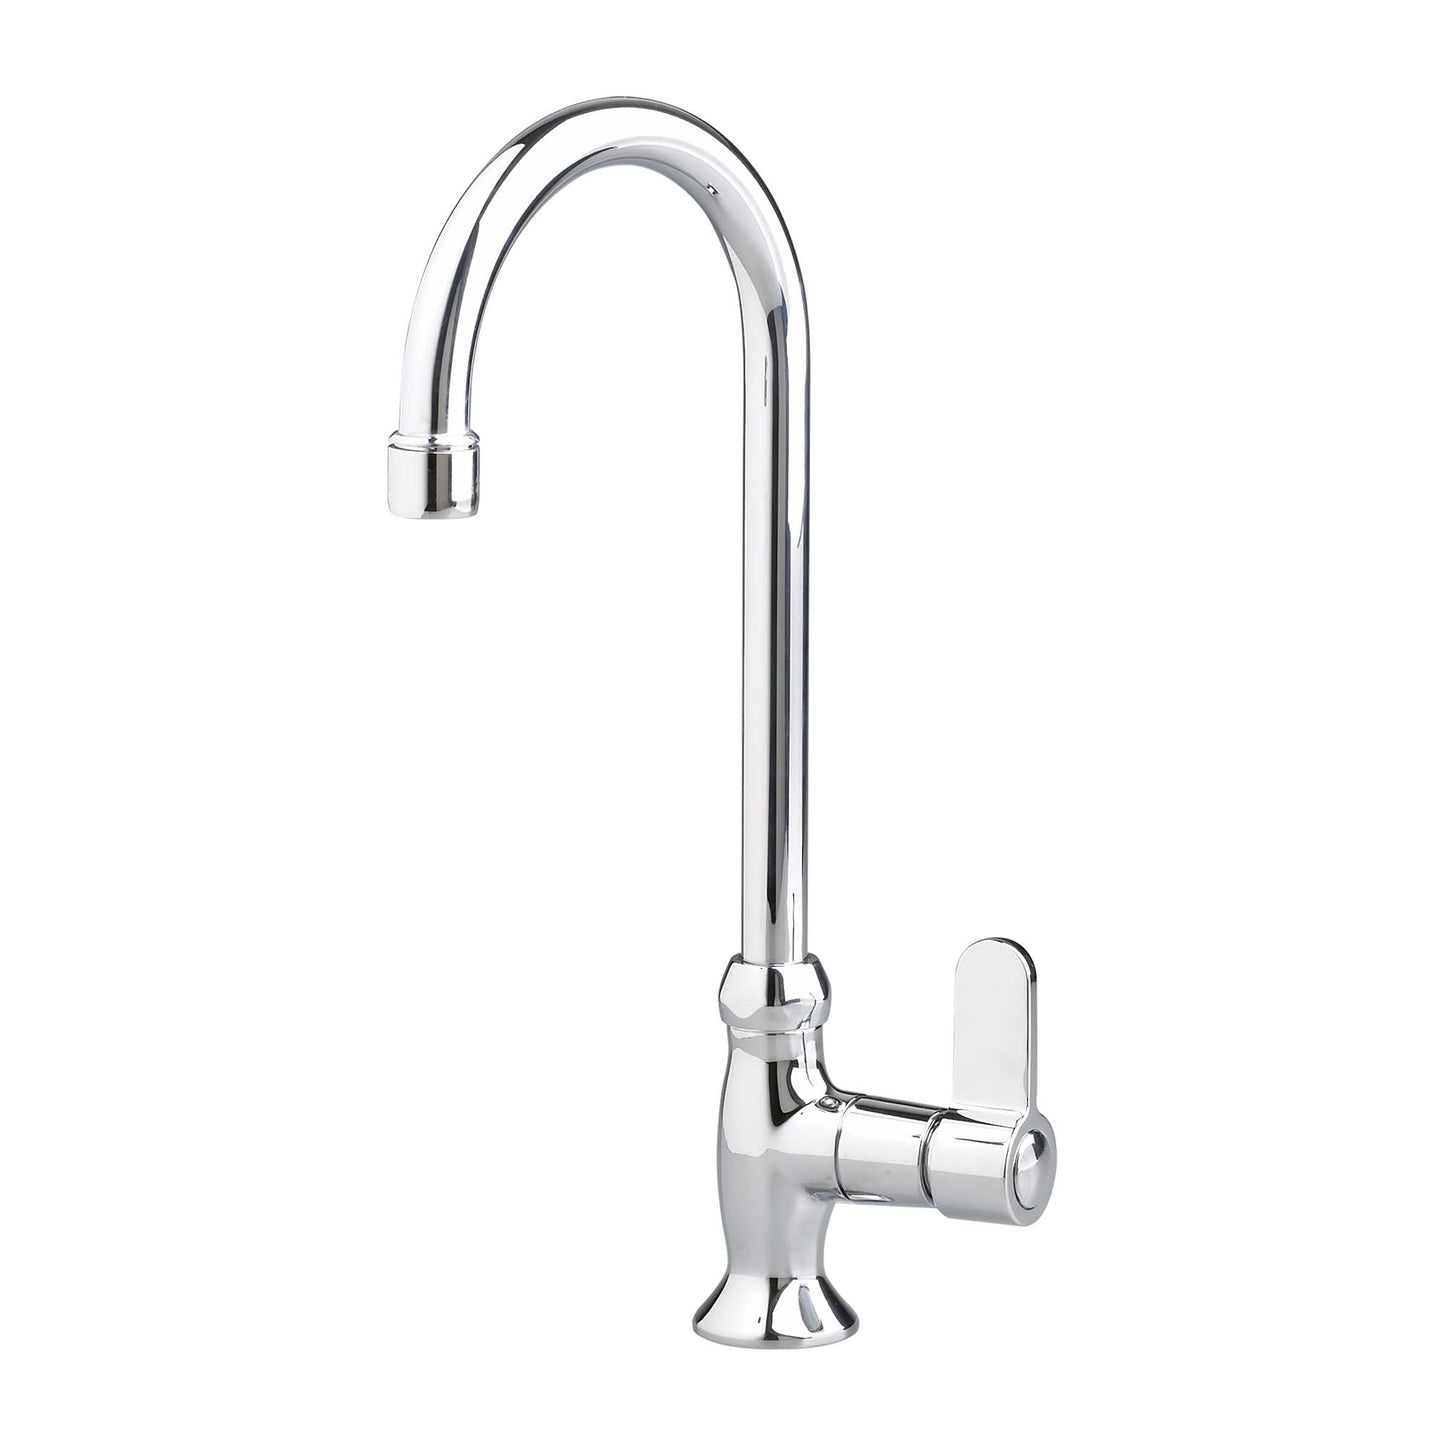 AMERICAN-STANDARD 7100241H.002, Heritage Single Hole Pantry Faucet With Lever Handle, 1.5 gpm/5.7 Lpm in Chrome